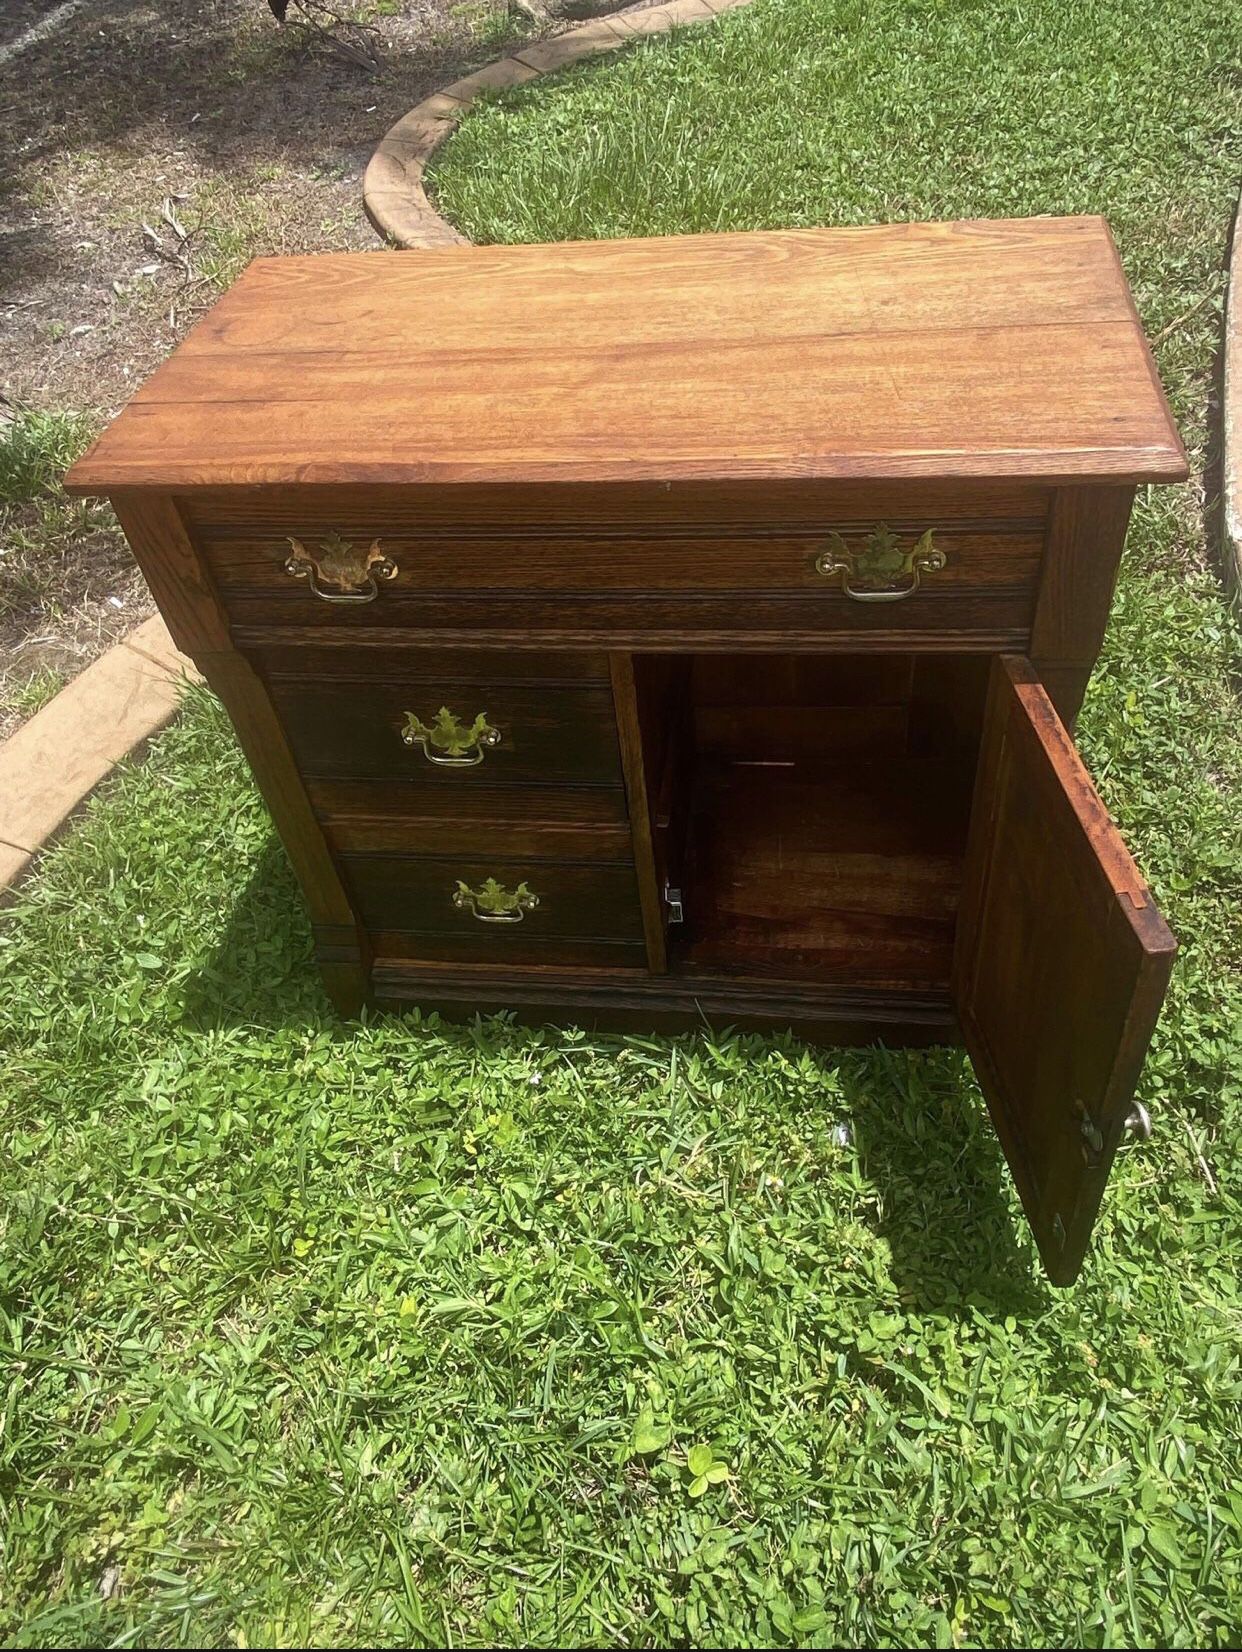 Antique Eastlake Missionary Dresser (1800 circa)  Measures 27.5”H x 17”W x 30.5”L With Knapp Joint Dresser Drawers